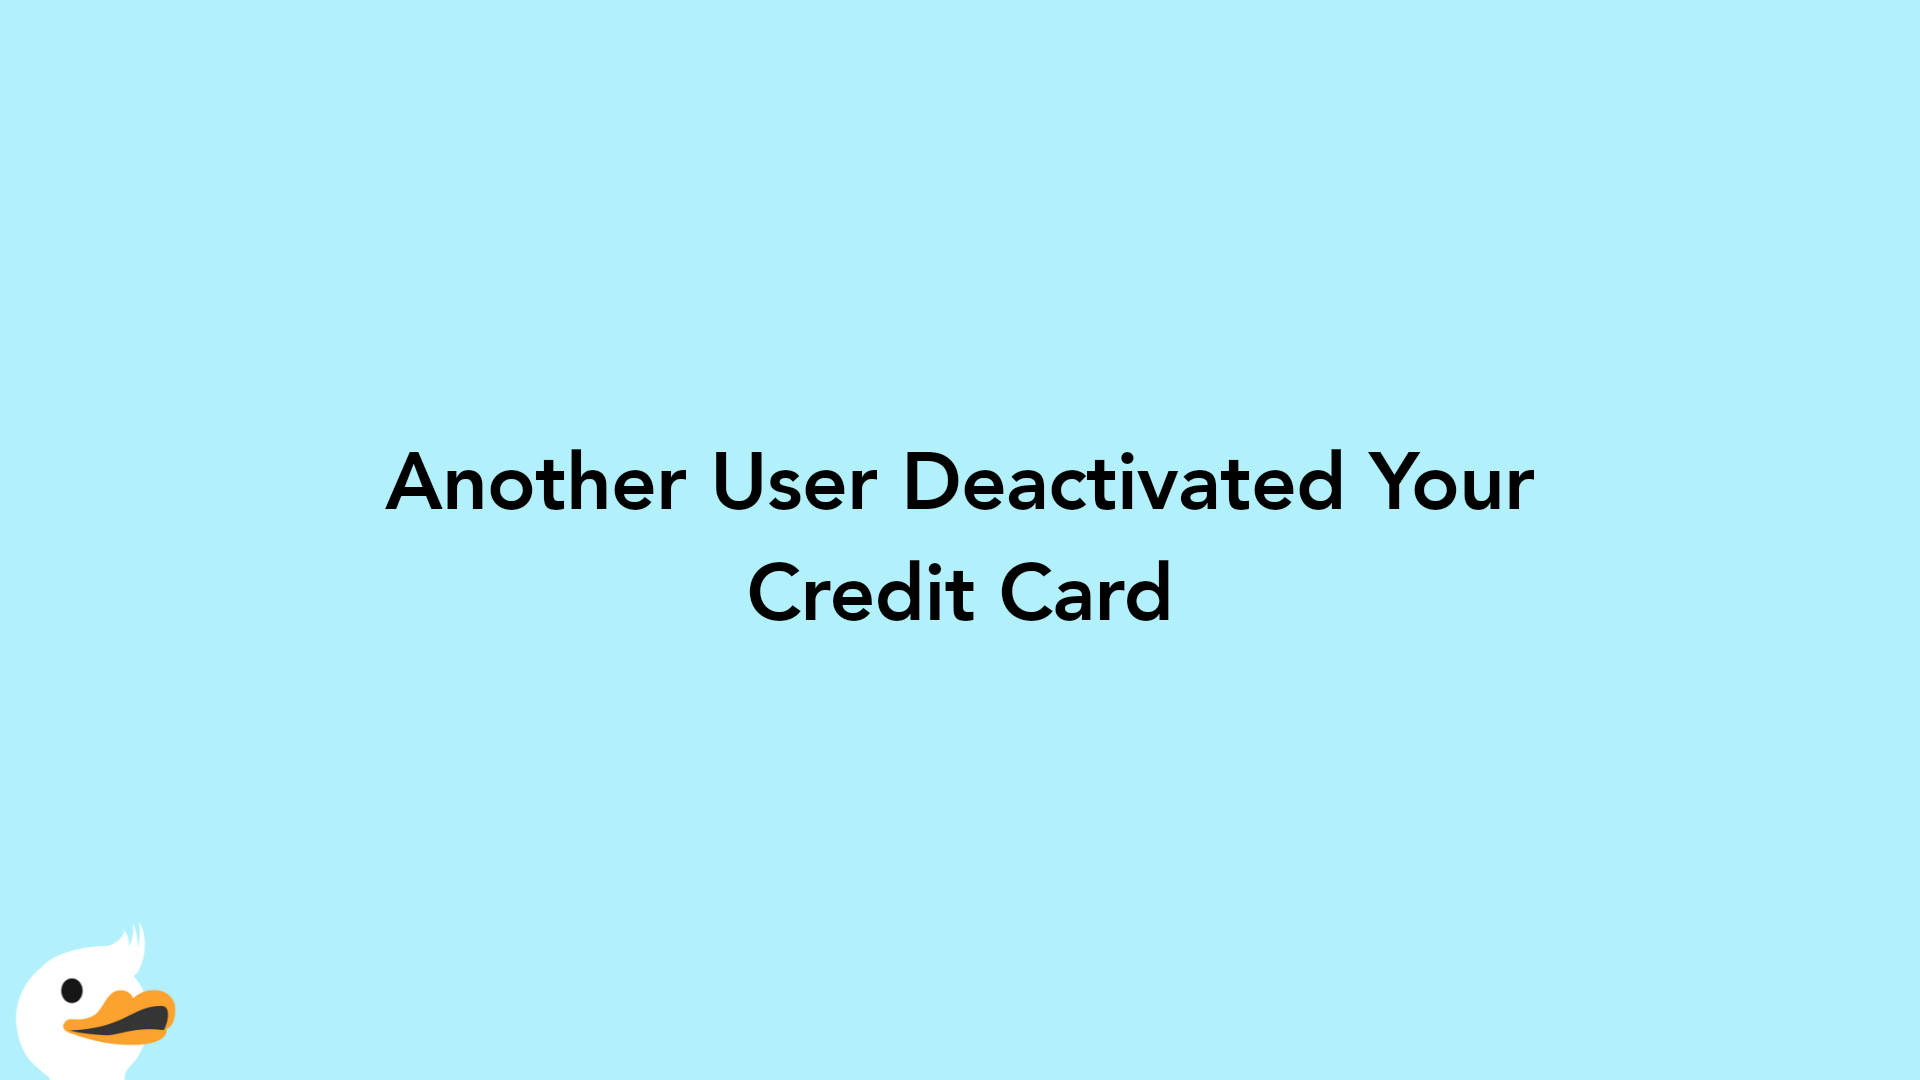 Another User Deactivated Your Credit Card